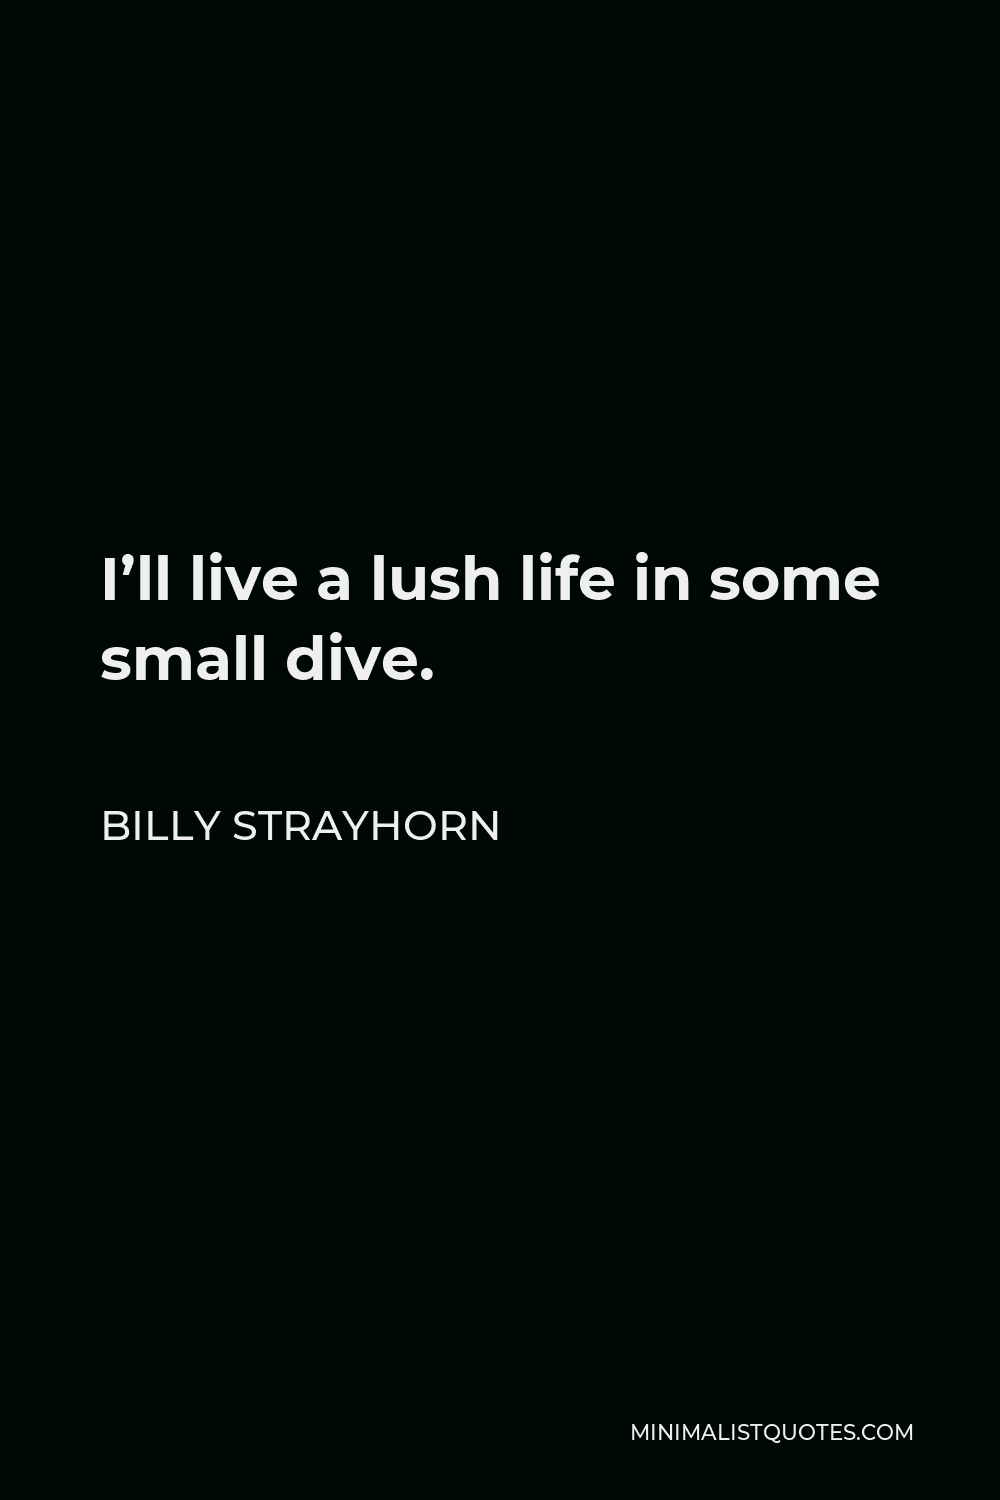 Billy Strayhorn Quote - I’ll live a lush life in some small dive.